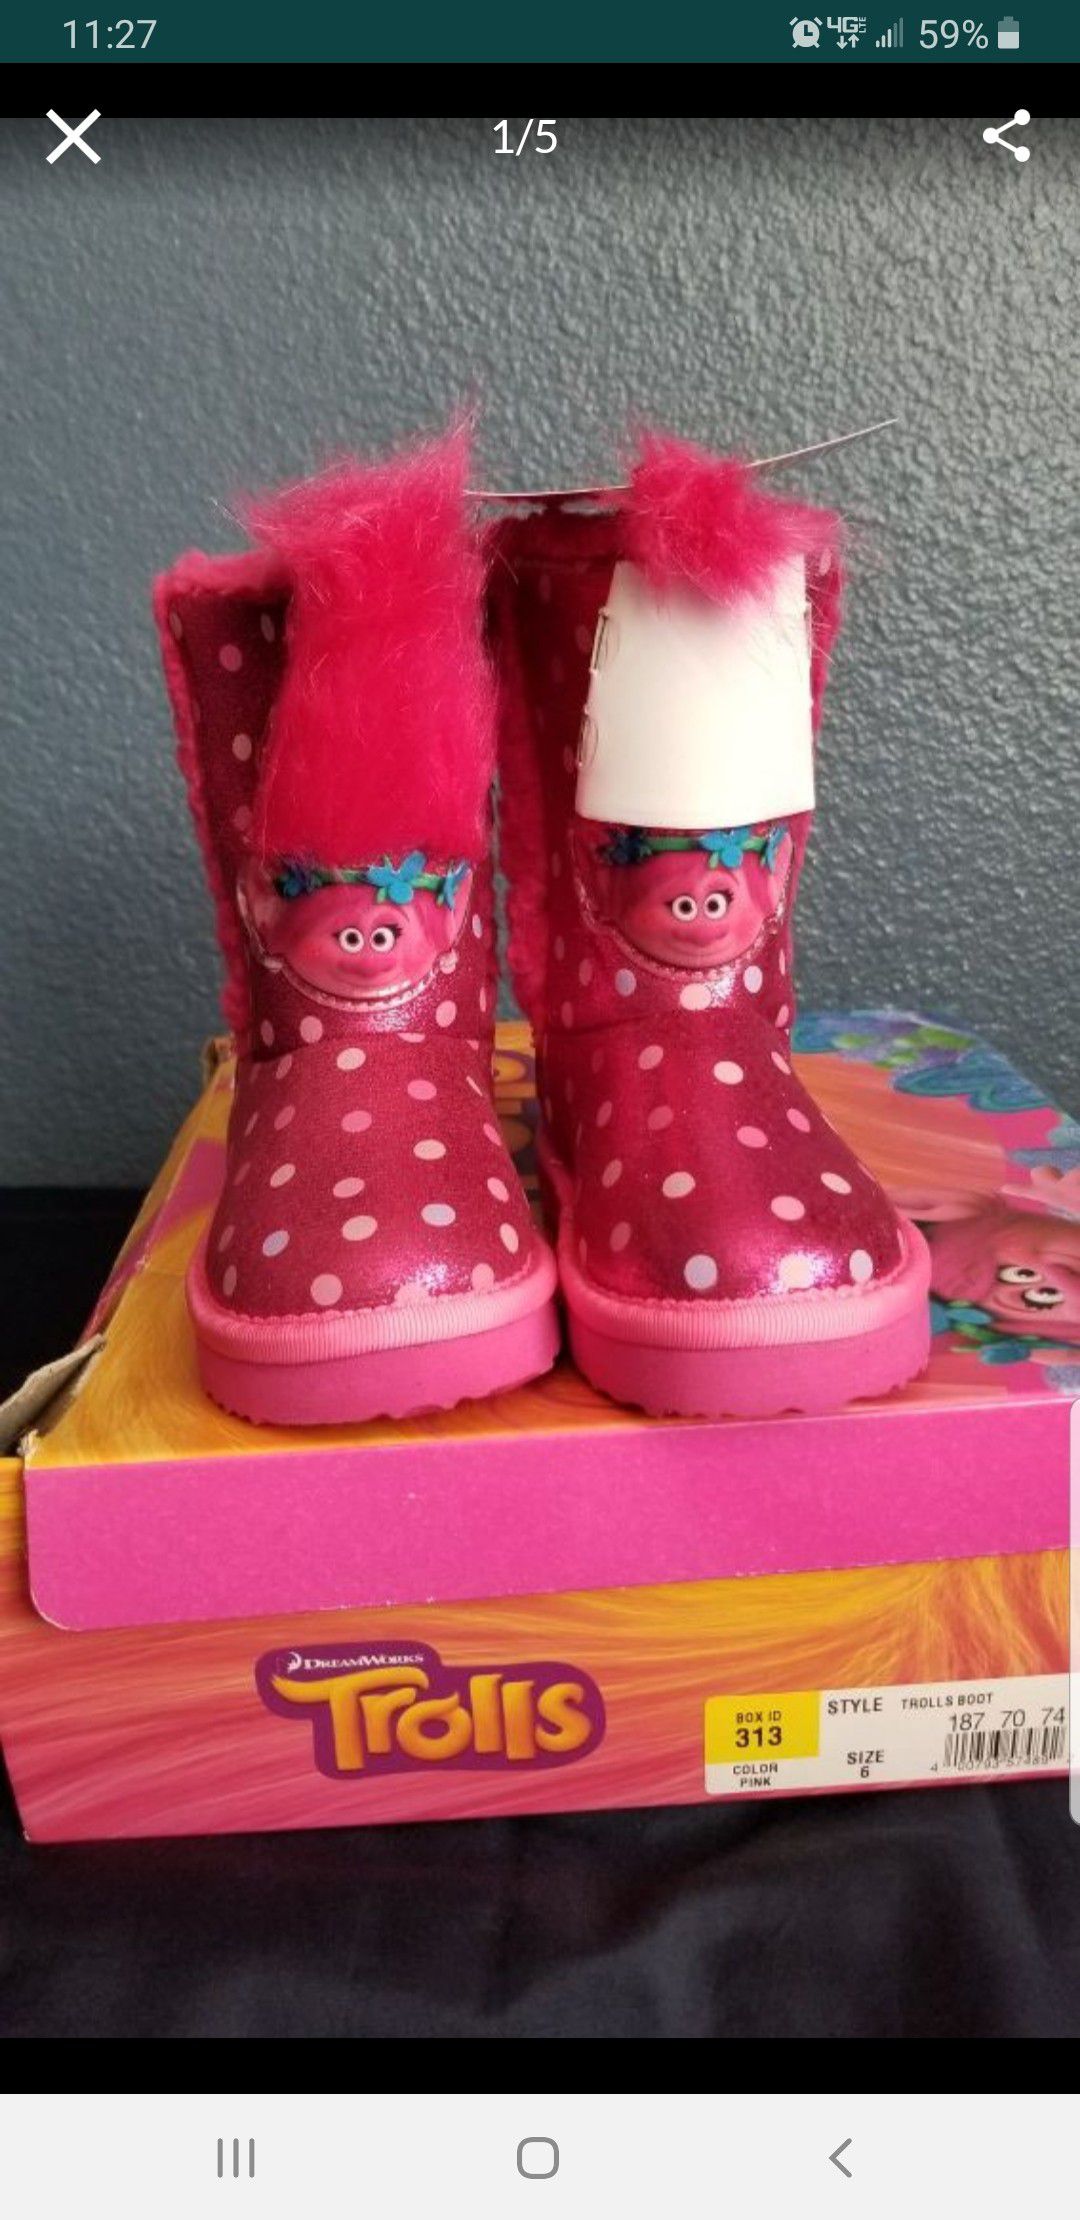 Trolls Boots, Girls Pink boots size 6, baby toddler size